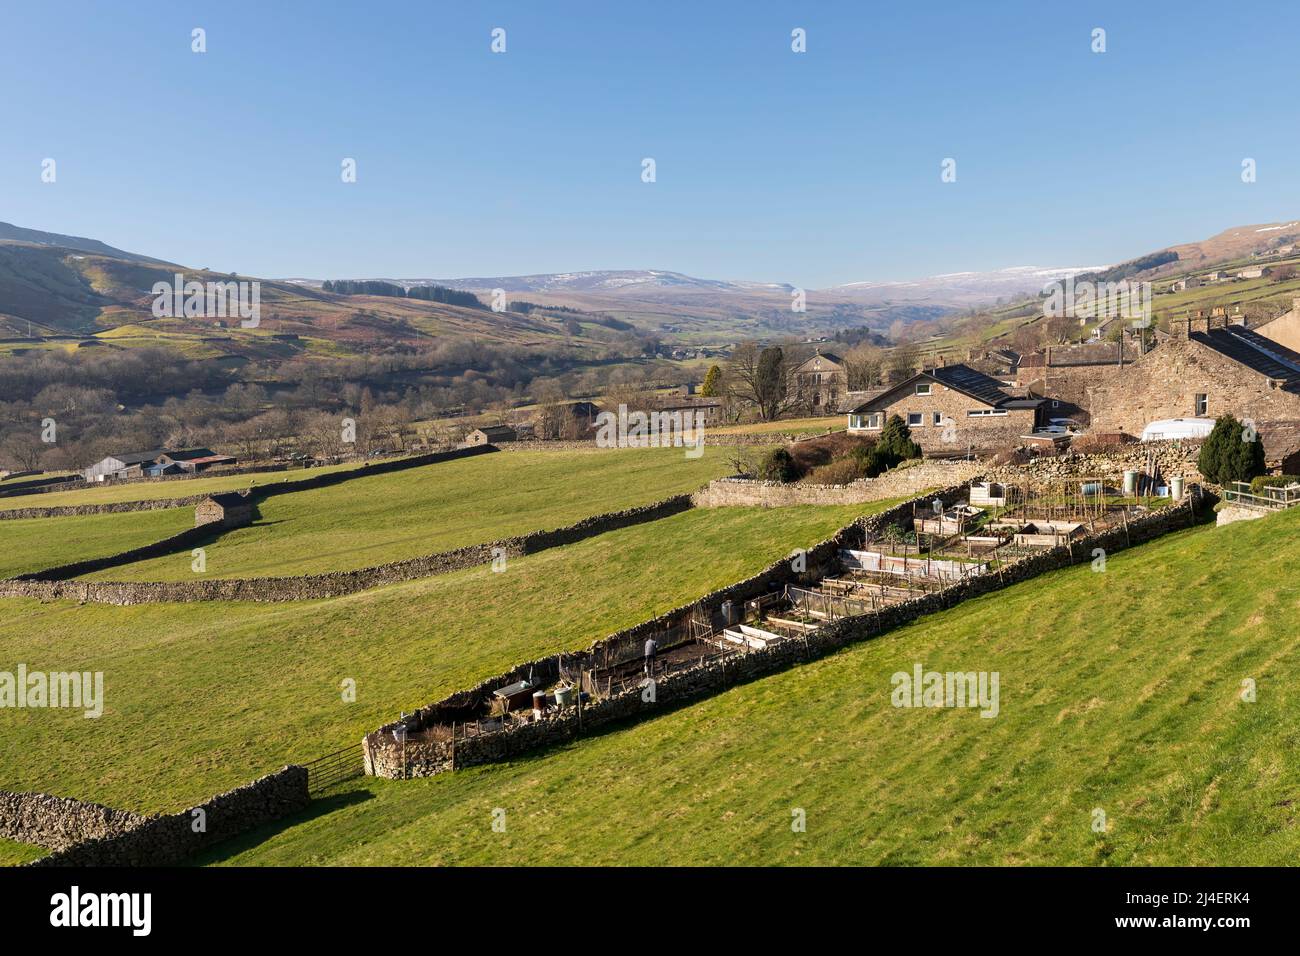 Allotments in the village of Gunnerside, Swaledale, Yorkshire Dales National Park. Iconic dry stone walls and stone barns dot the landscape below the Stock Photo